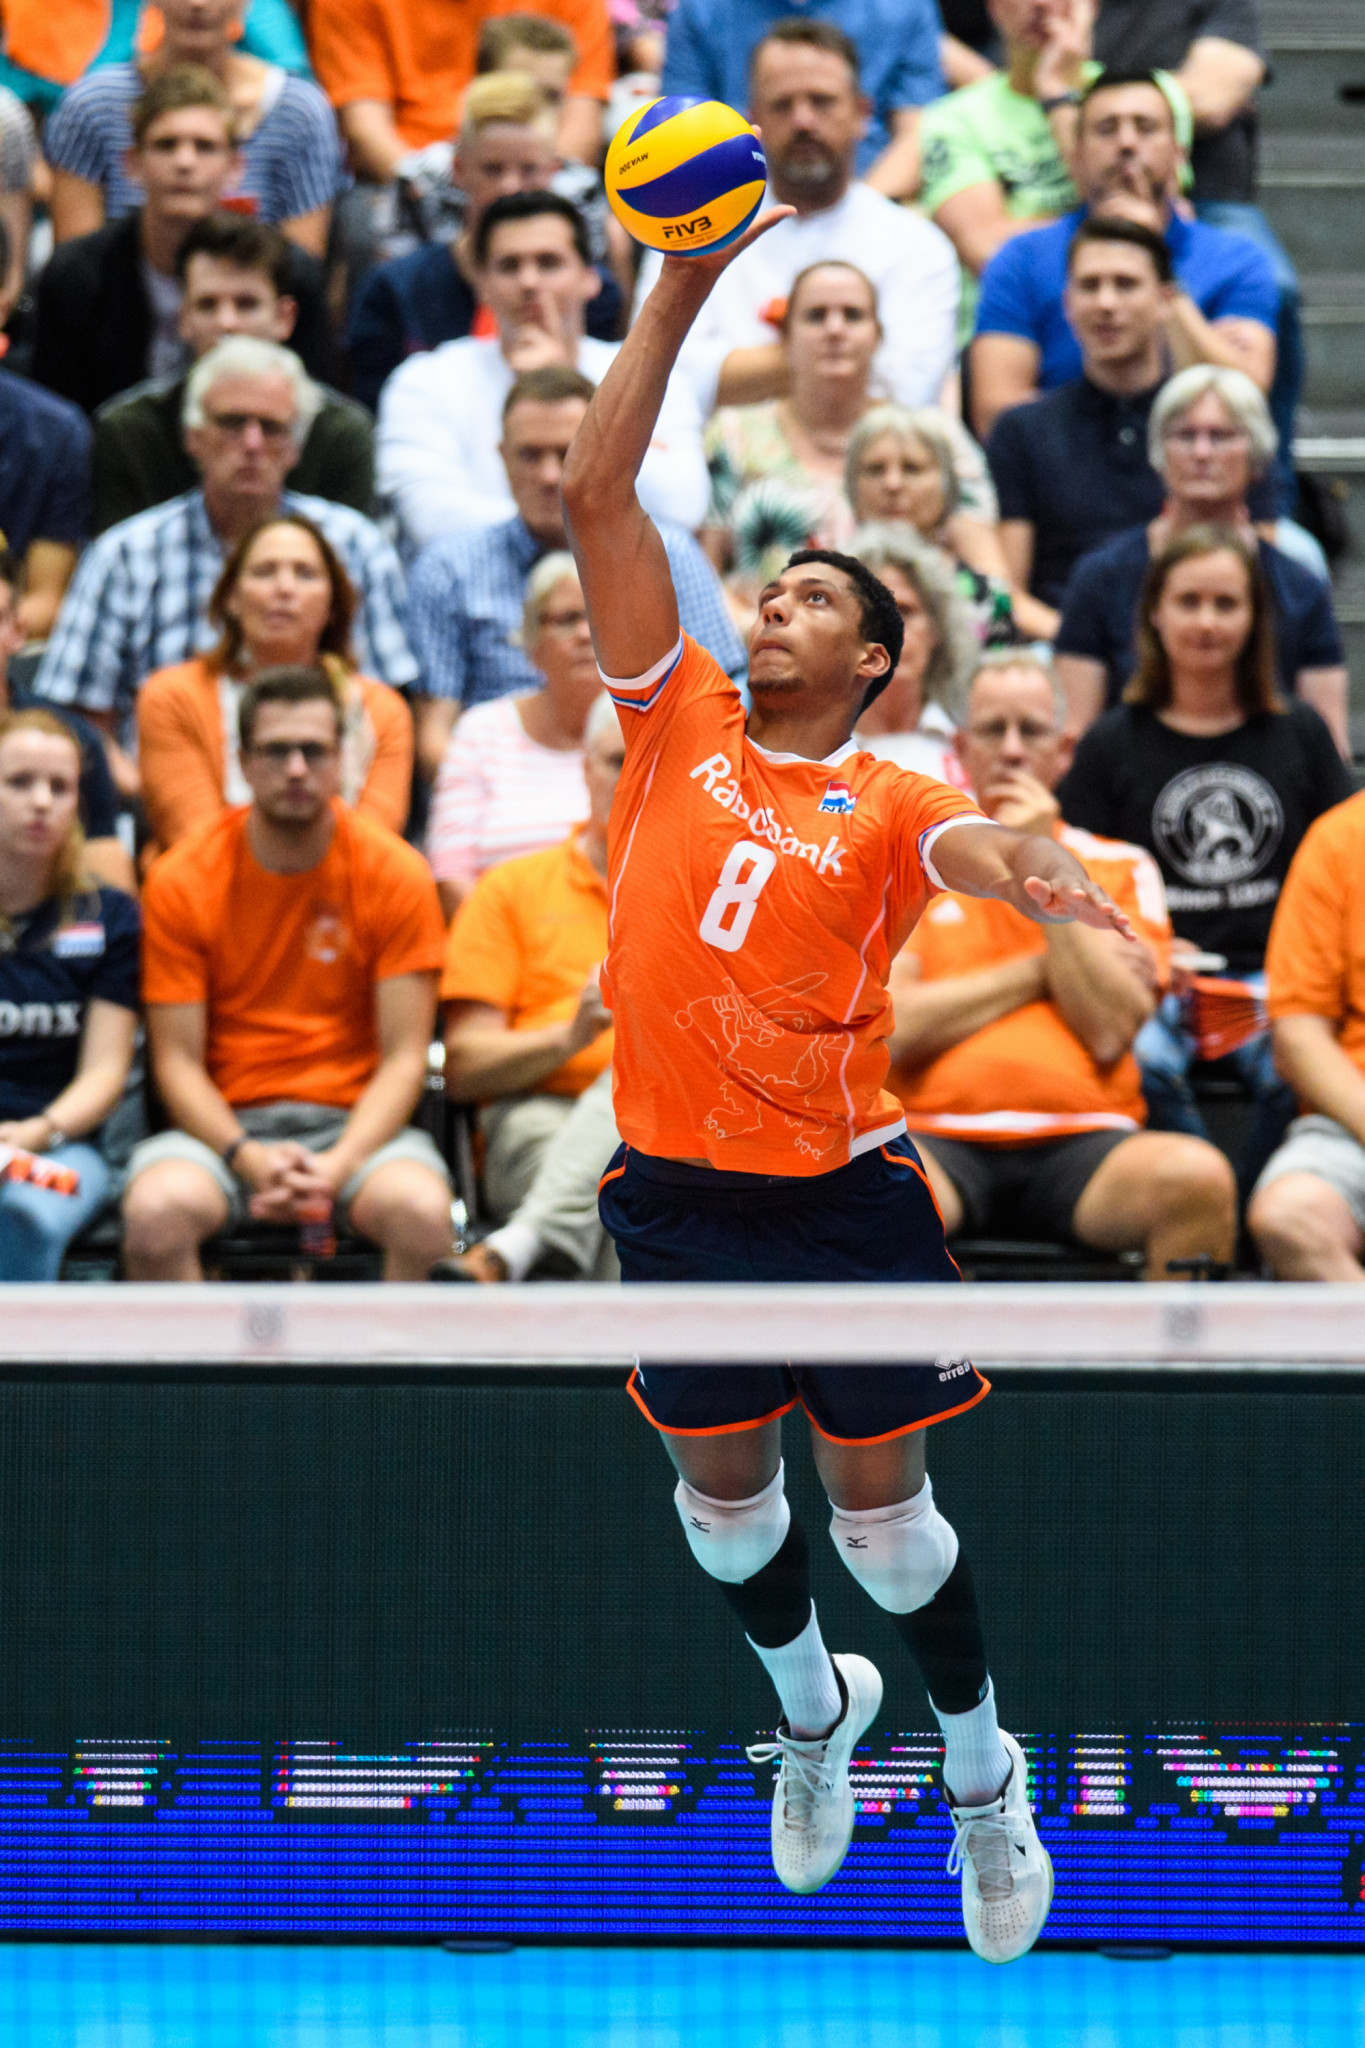 At Rotterdam Ahoy, hosts The Netherlands defeated Belgium to secure a second successive Pool B victory ©FIVB